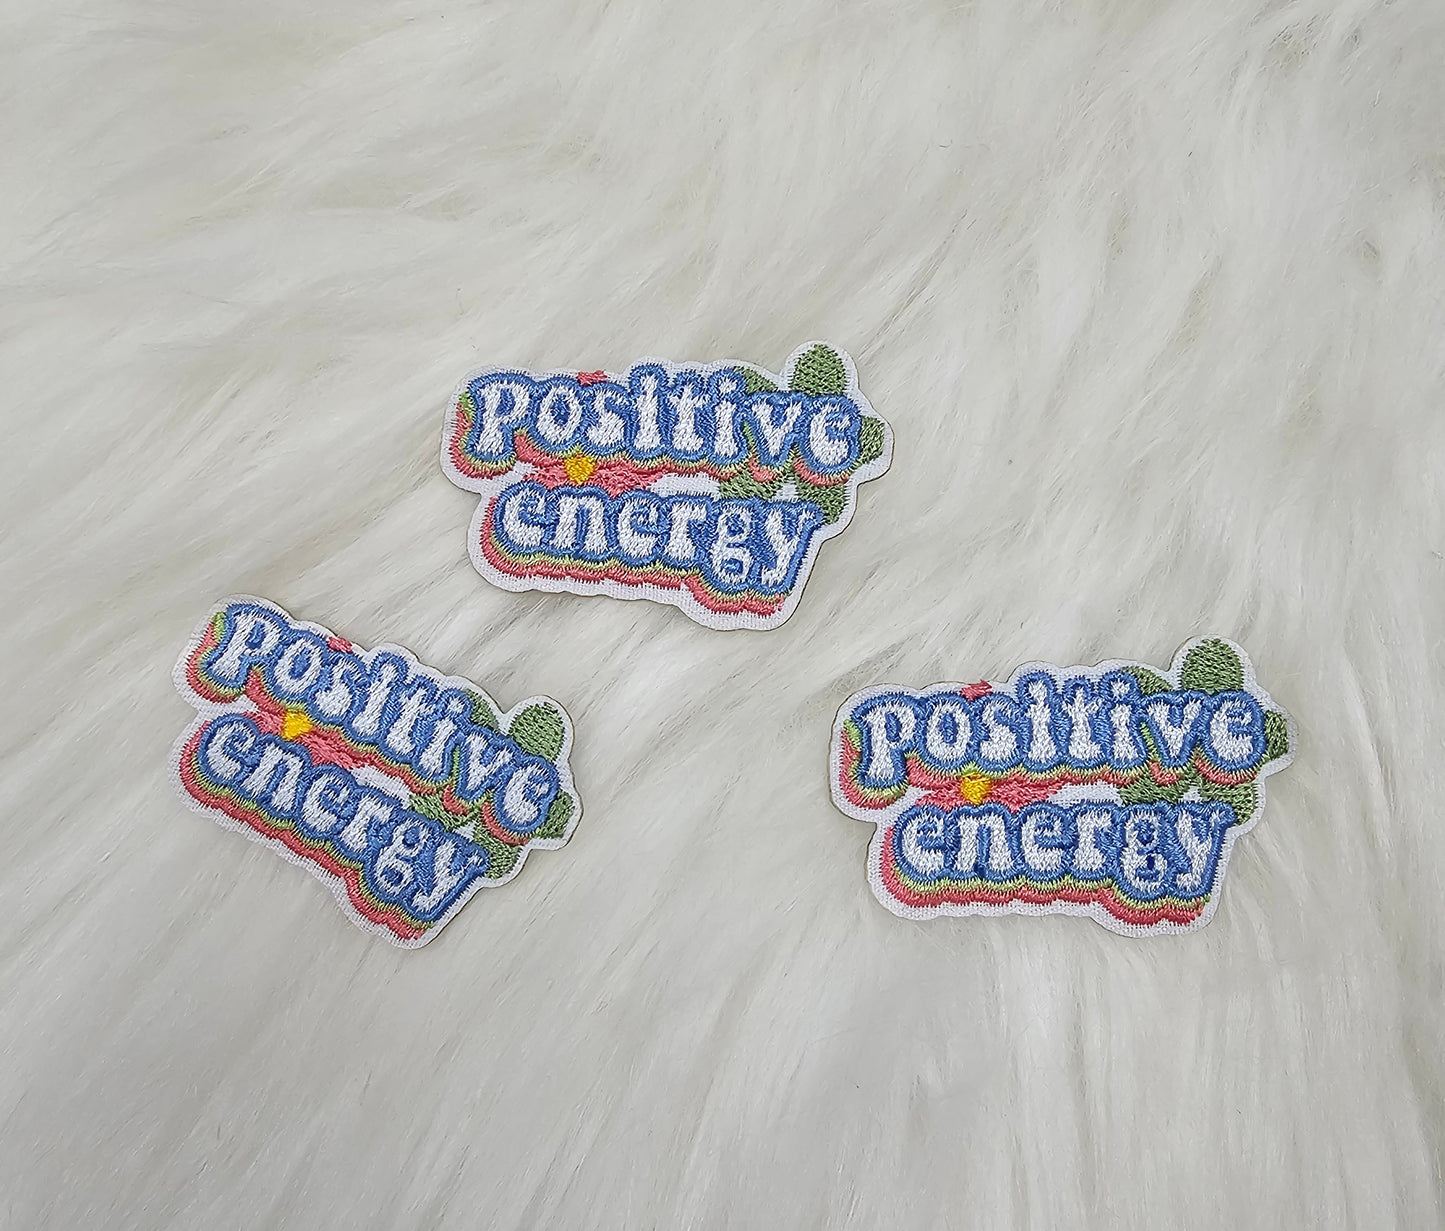 'Positive Energy' Floral Pastel Embroidery Iron On Patch